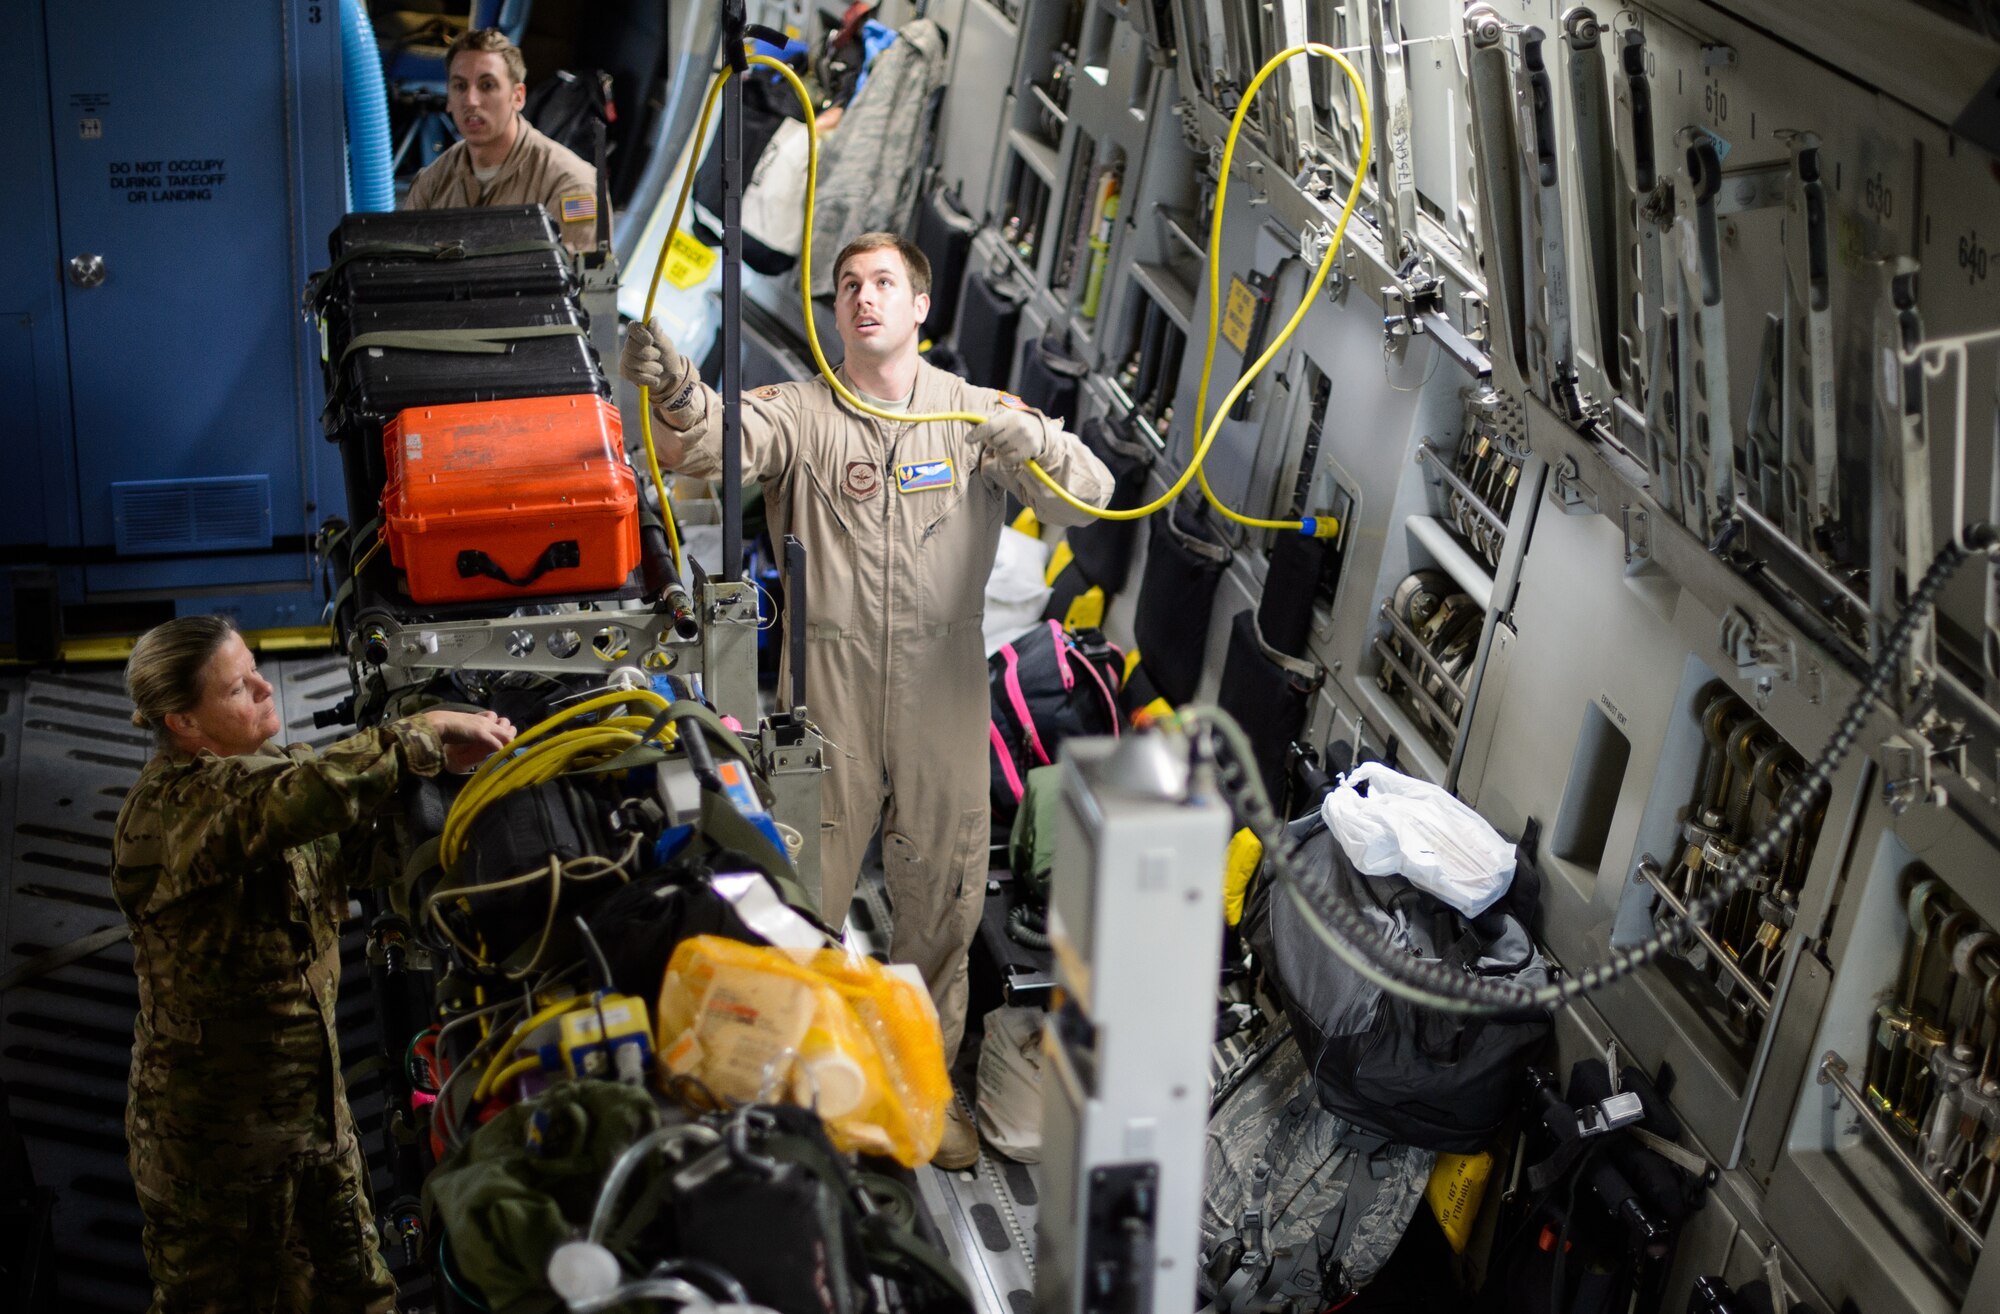 Tech. Sgt. Derek Matway, 10th Expeditionary Aeromedical Evacuation Squadron technician, sets up medical equipment inside a C-17 Globemaster III, Nov. 10, 2015, at Ramstein Air Base, Germany. Matway and a crew of medical Airmen flew to a deployed location in Southwest Asia to retrieve service members in need of medical attention. (U.S. Air Force photo/Staff Sgt. Armando A. Schwier-Morales)